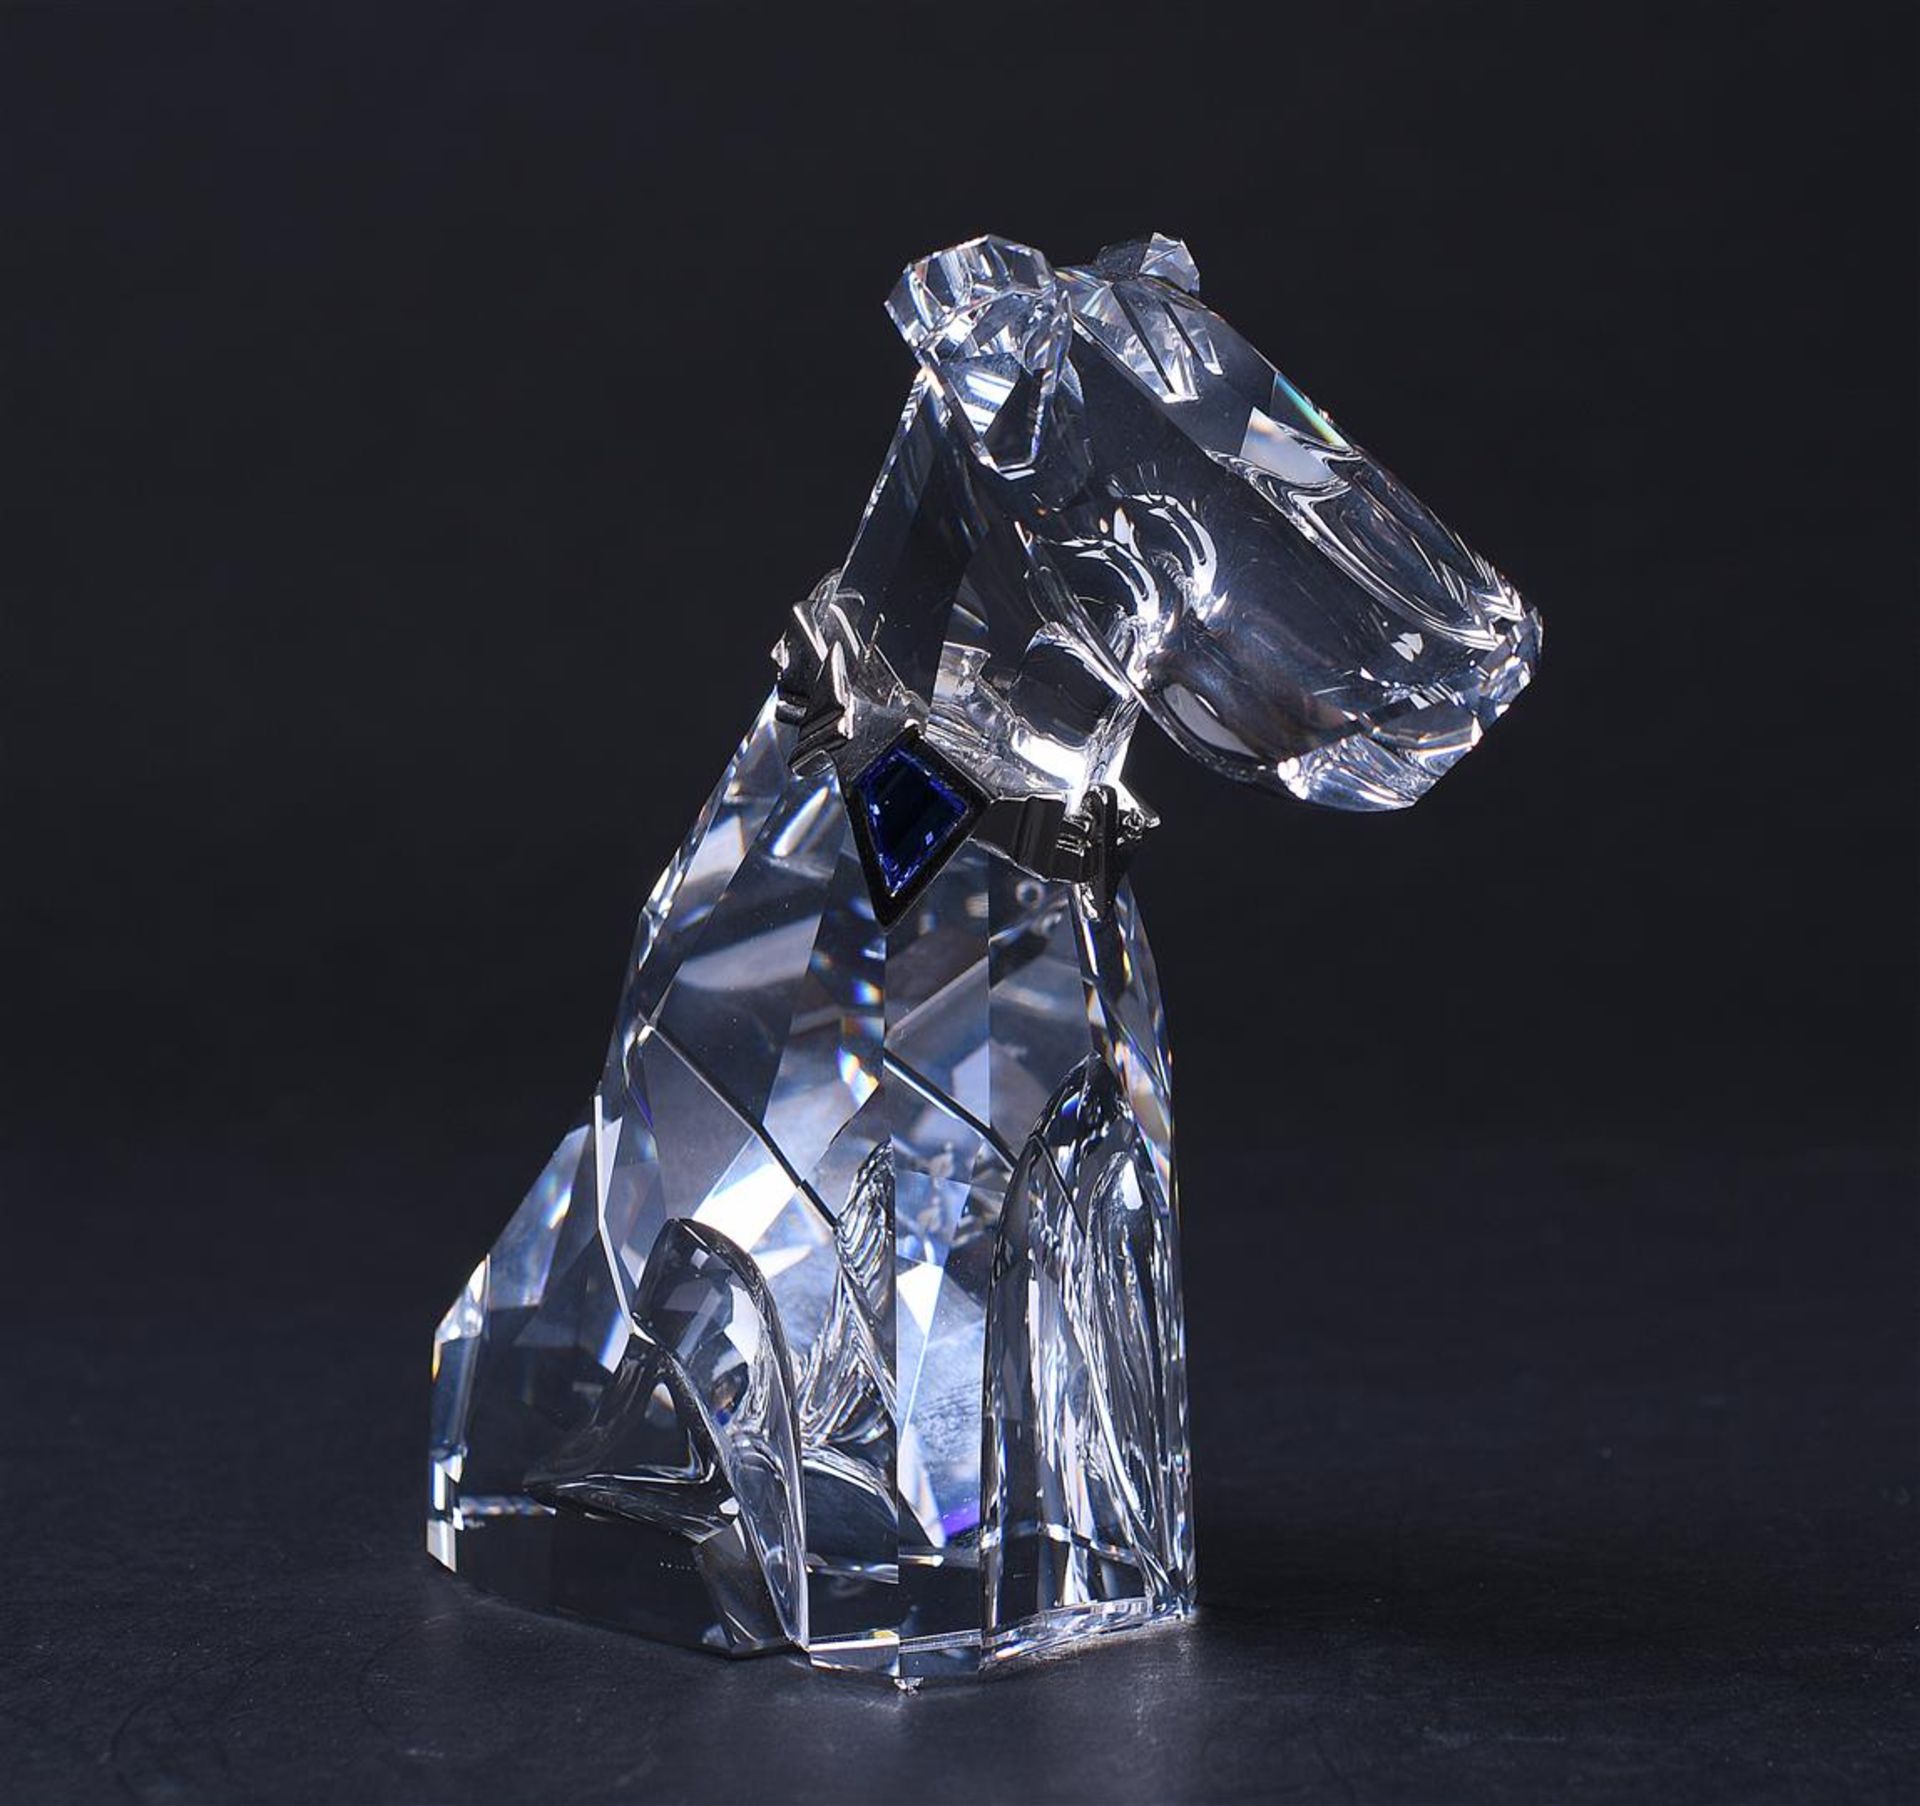 Swarovski, the dog, Year of issue 2002,289202. Includes original box.
H. 11,5 cm. - Image 4 of 5